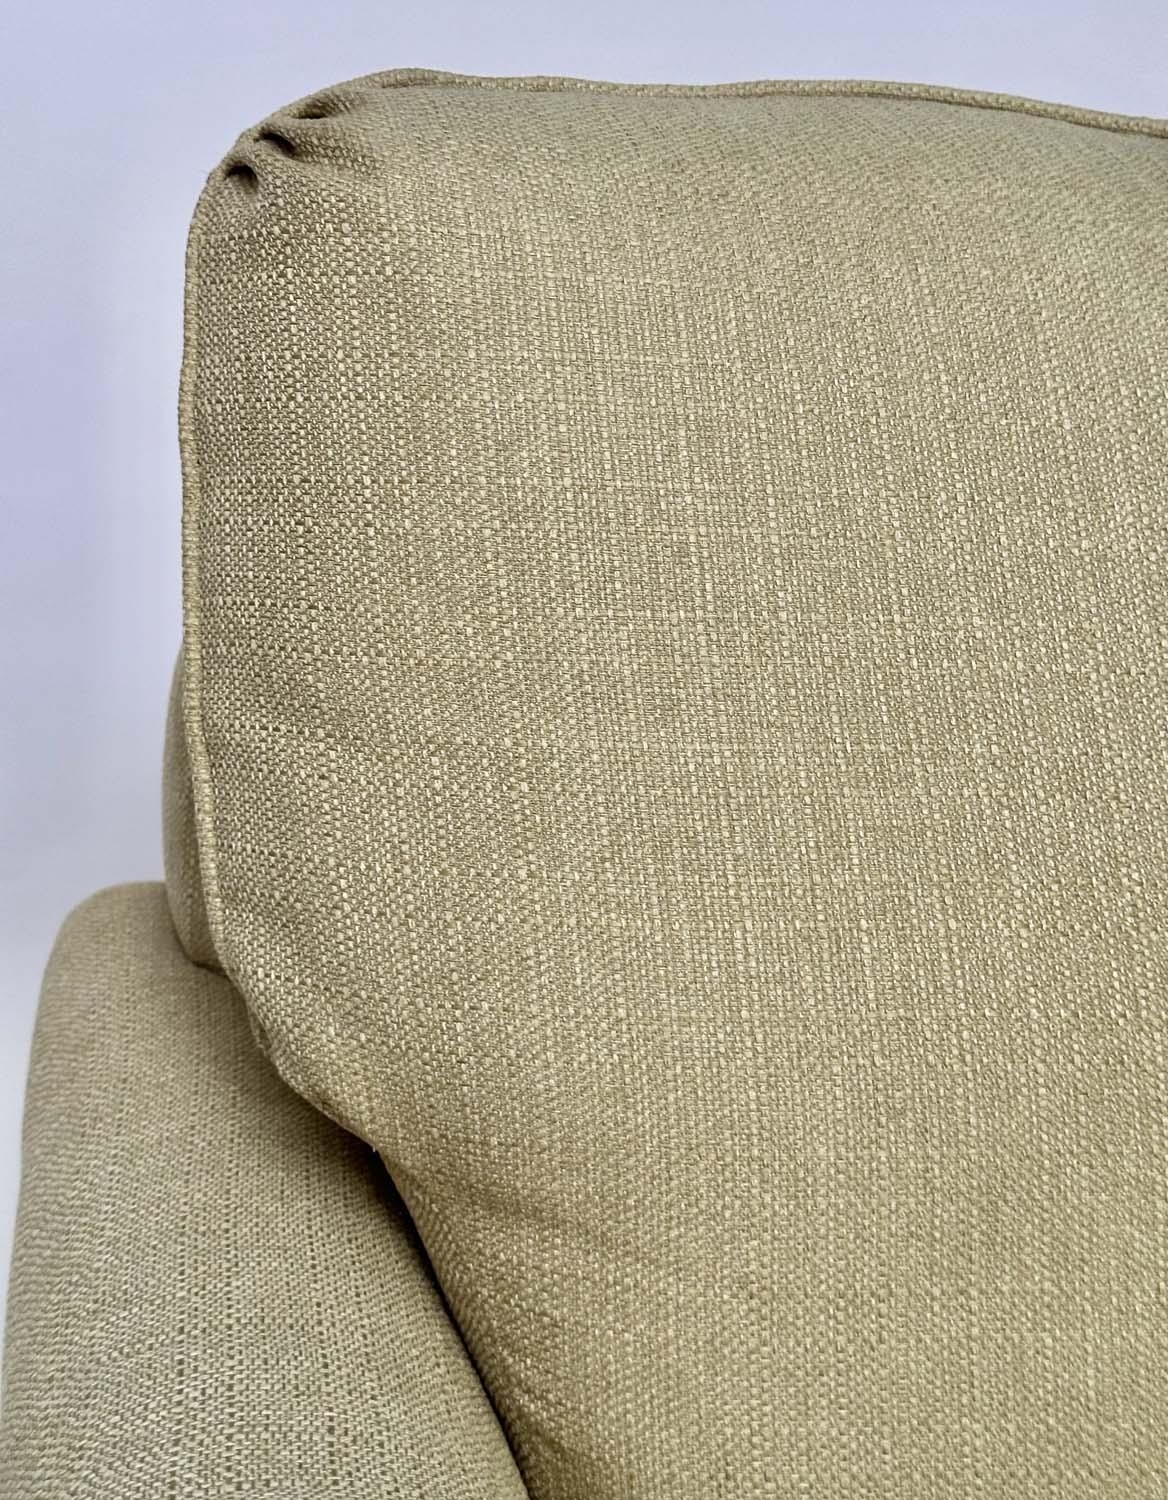 COUNTRY HOUSE ARMCHAIR, Howard and Son style Bridgewater model inspired with primrose yellow slub - Image 8 of 8